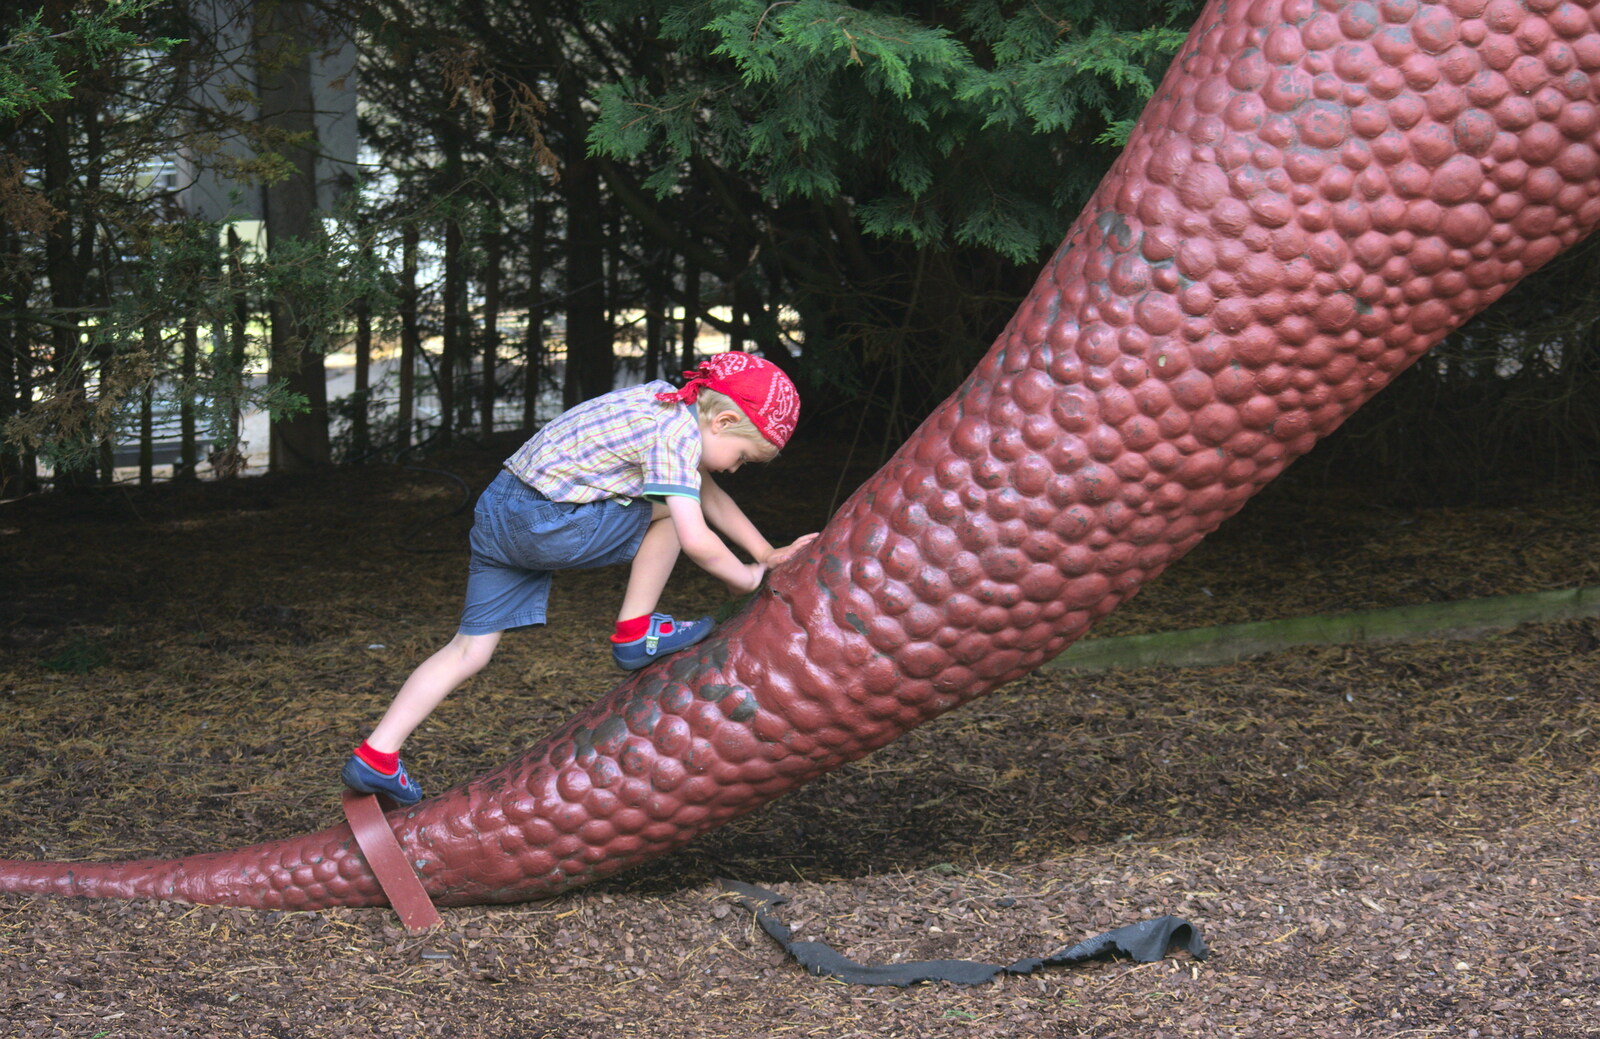 Fred climbs up the tail of a Tyrannosaurus Rex from Tiger Cubs at Banham Zoo, Banham, Norfolk - 6th August 2013